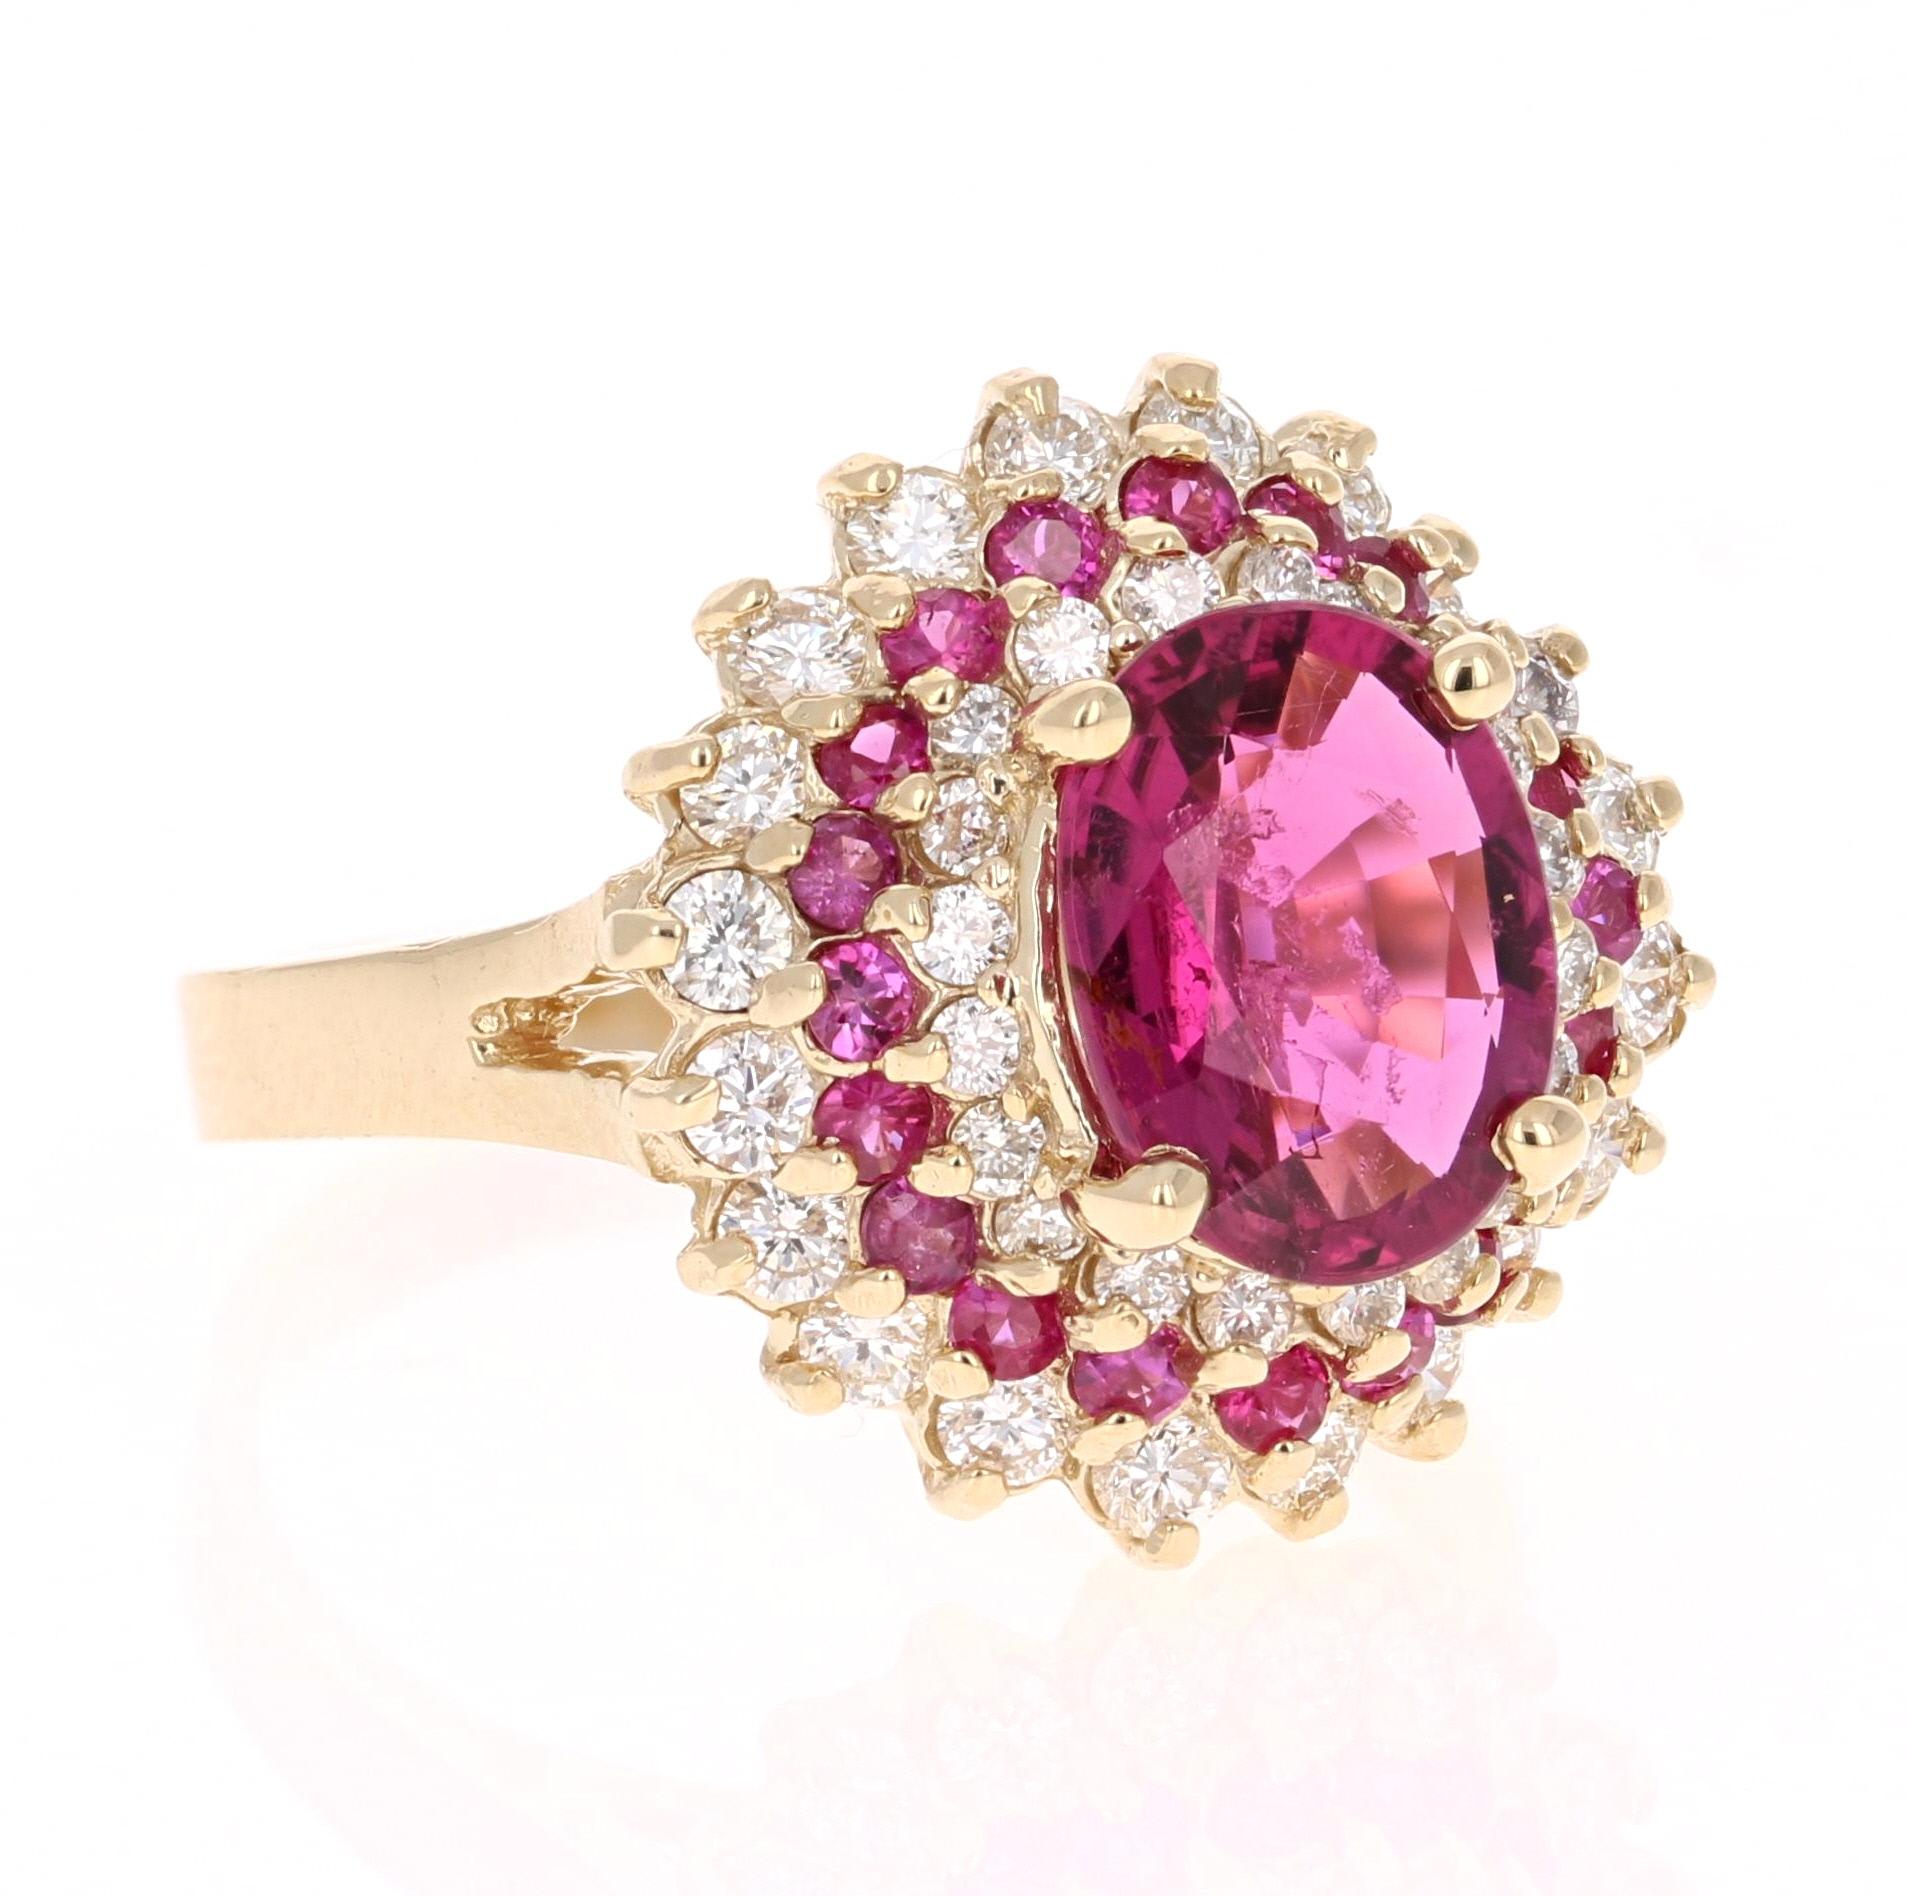 This beauty has an Oval Cut Pink Tourmaline set in the center of the ring that weighs 1.79 carats.  It is surrounded by 20 Round Cut Pink Sapphires that weigh 0.44 carats and 40 Round Cut Diamonds that weigh 0.80 carats (Clarity: VS2, Color: H). The